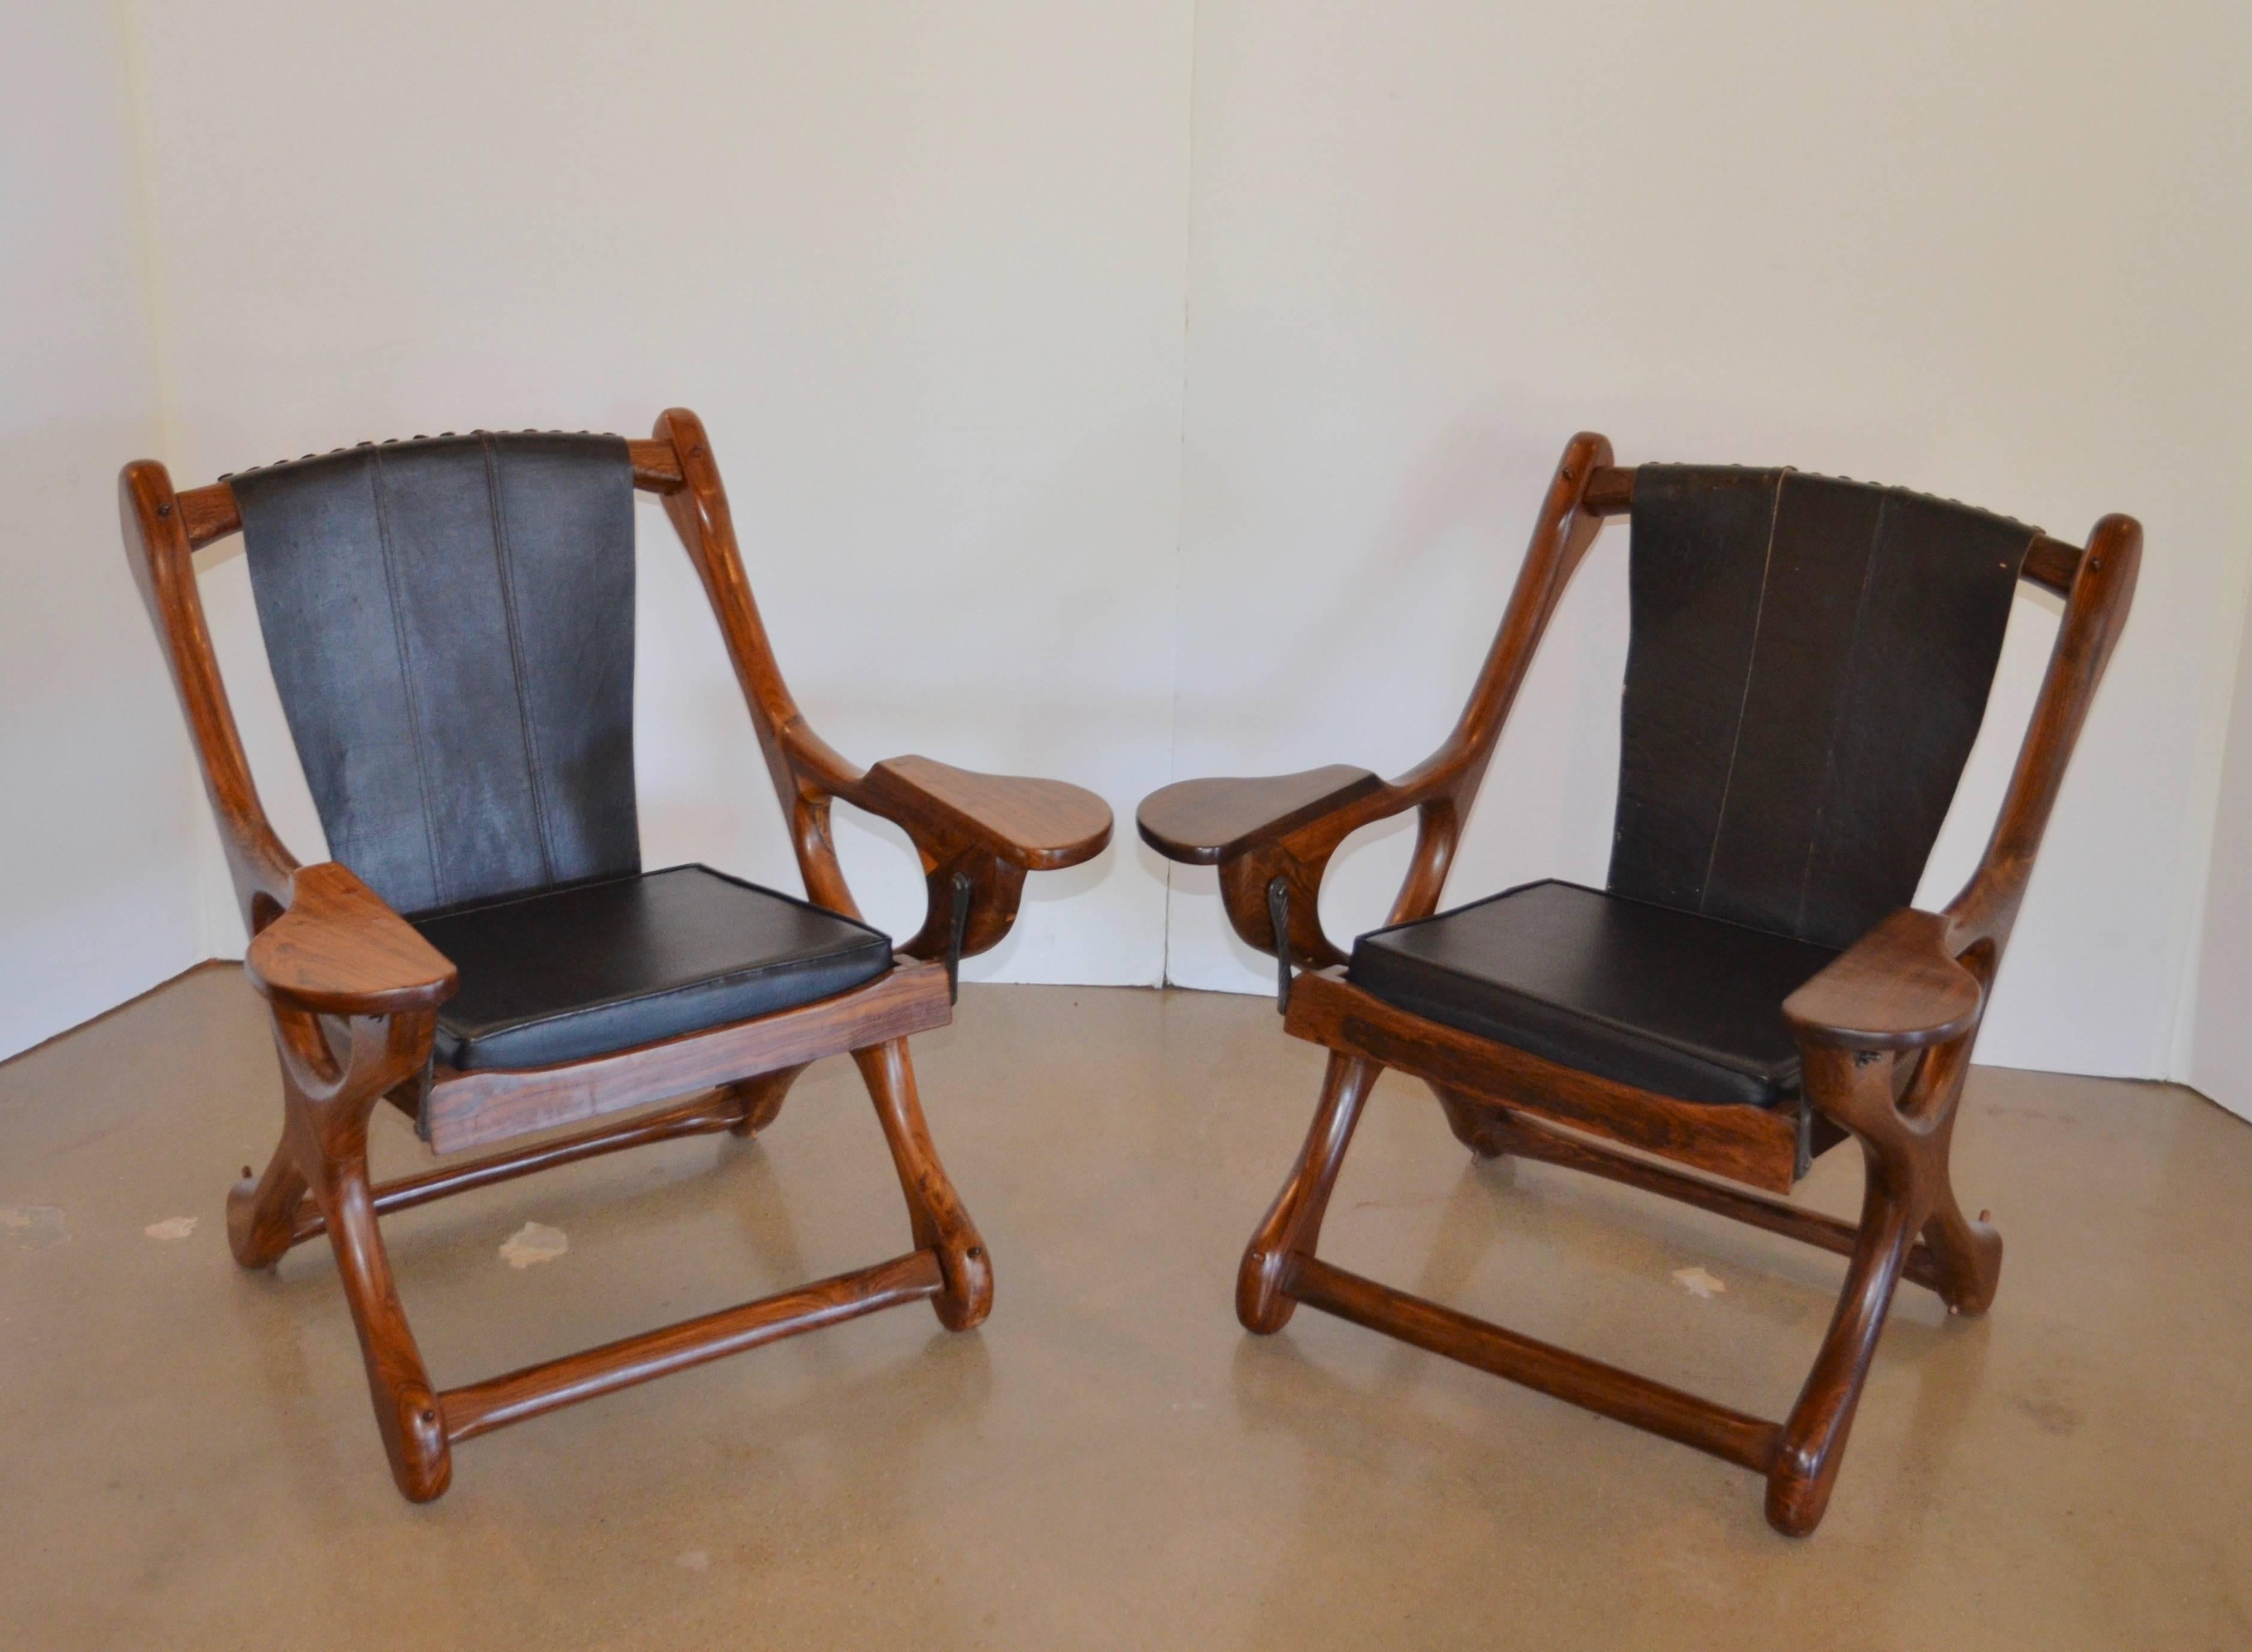 From Don Shoemaker, Mexico's most accomplished Mid-Century furniture designer, an iconic set of handcrafted 20th century chairs with ottoman.  Considered a Mid-Century Classic, this sling model has been featured in museum exhibits worldwide.